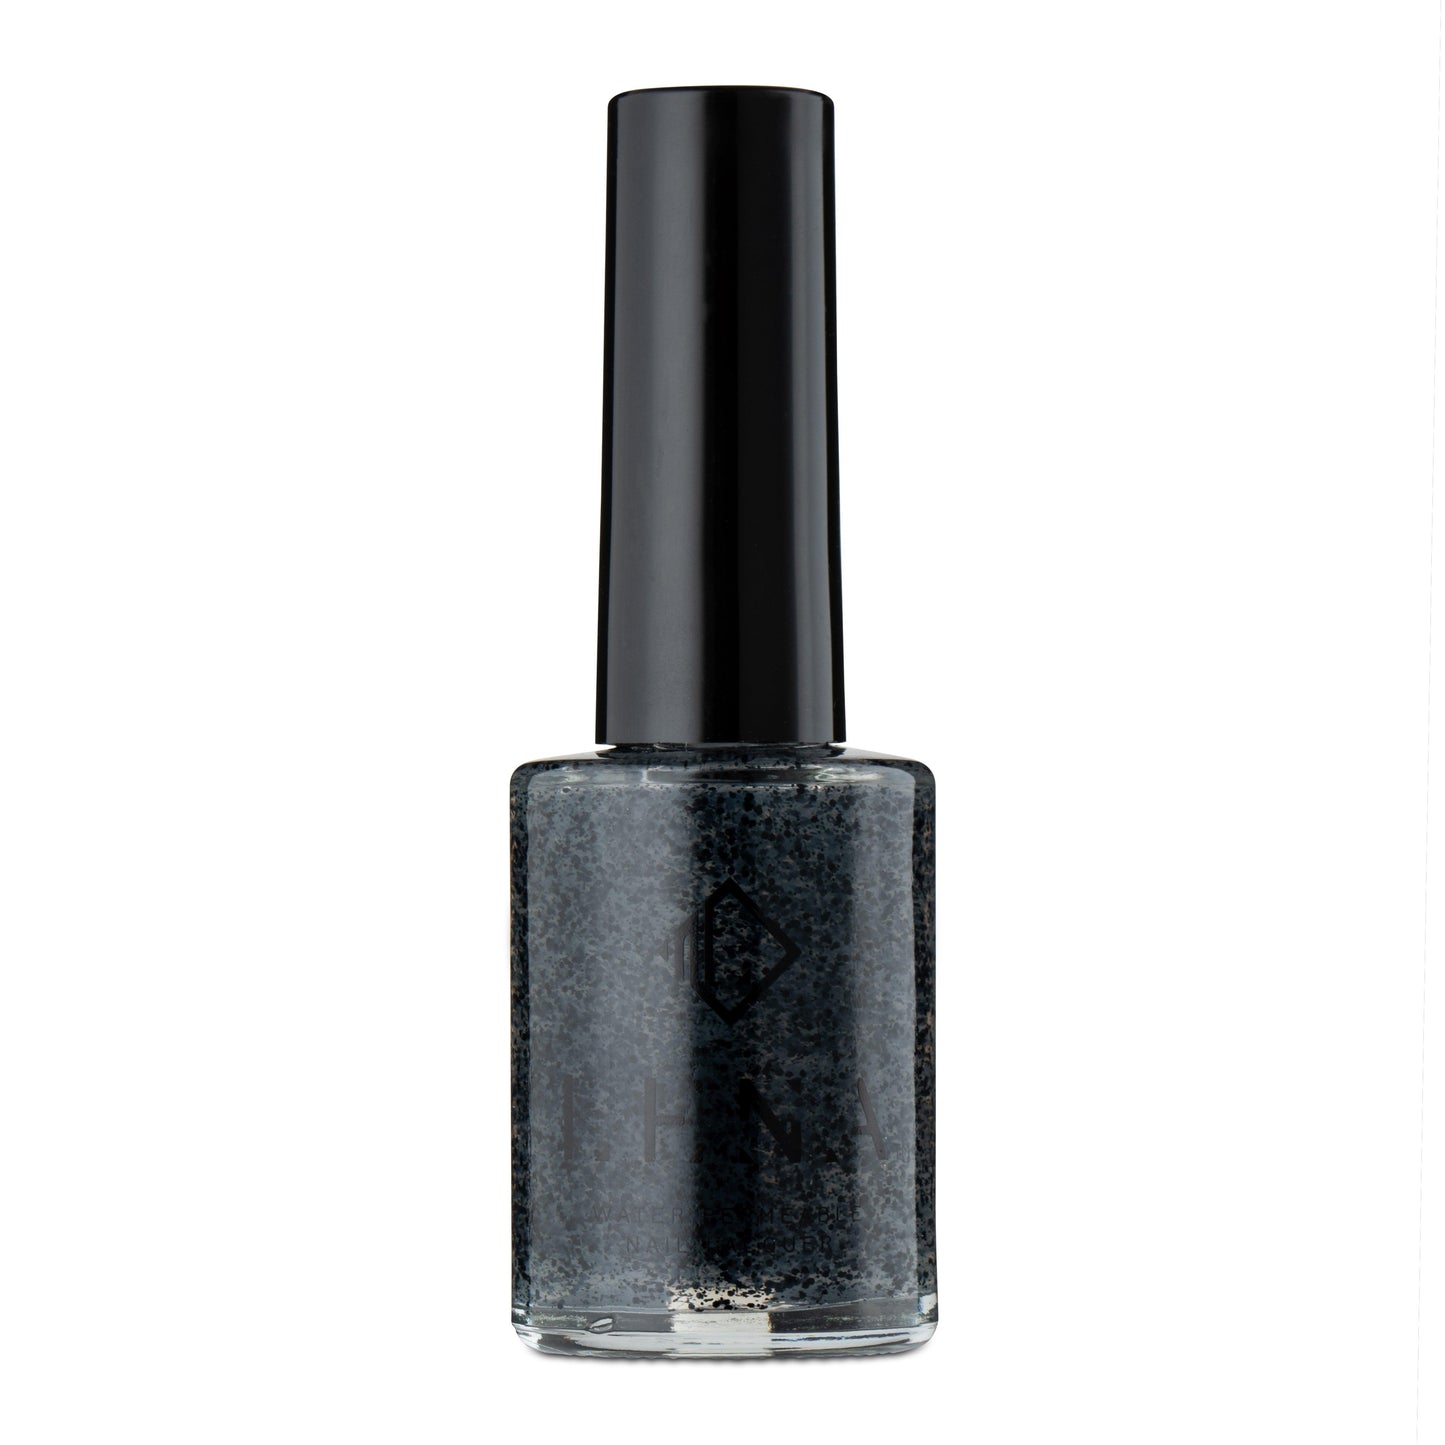 Speckled Pattern Breathable Halal Nail Polish - Speckle-tacular Style - SE01